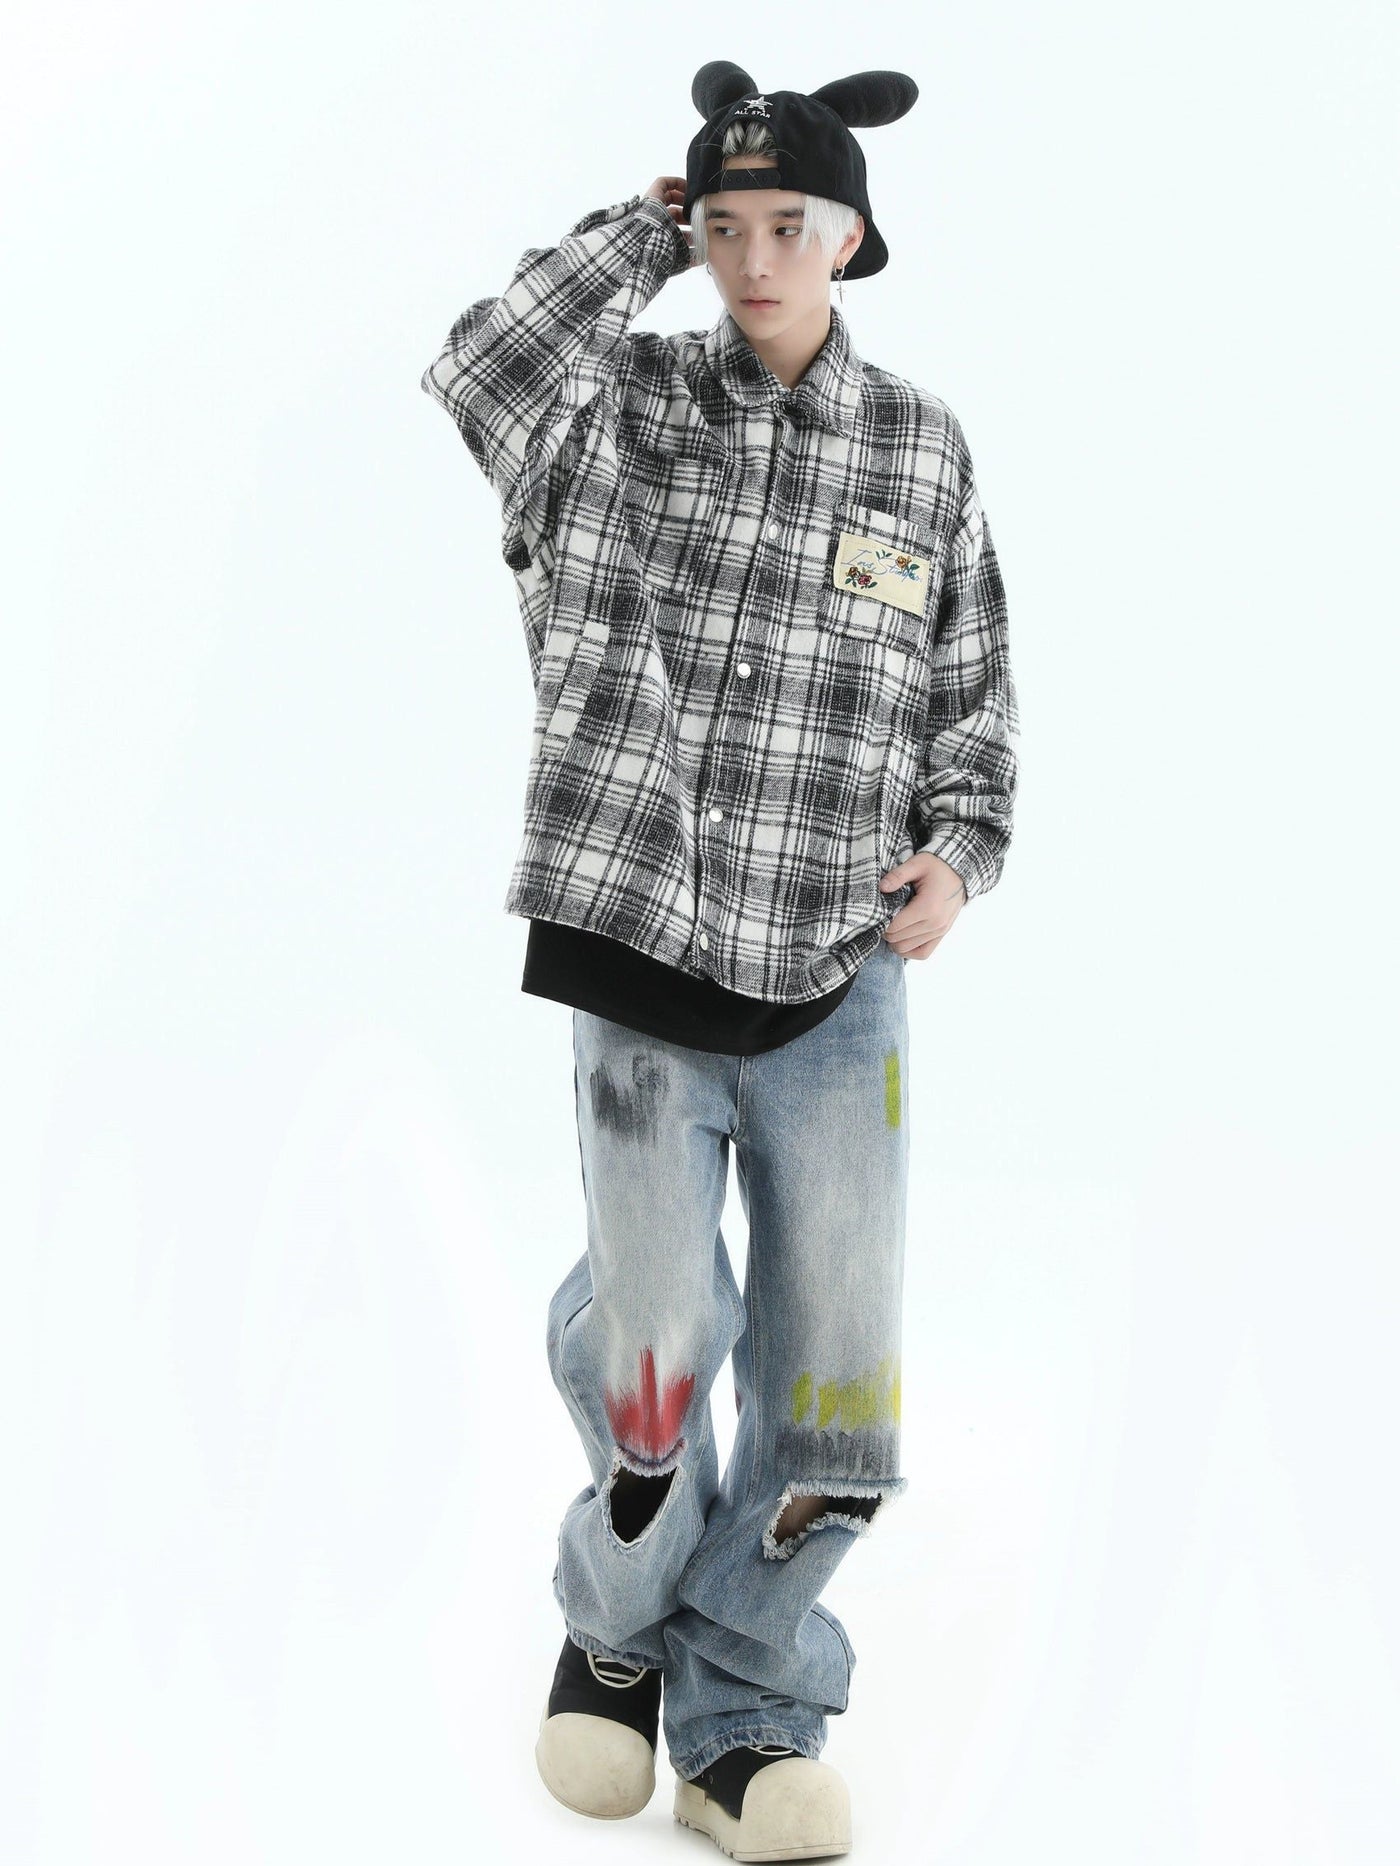 Patched Plaid Comfty Shirt Korean Street Fashion Shirt By INS Korea Shop Online at OH Vault